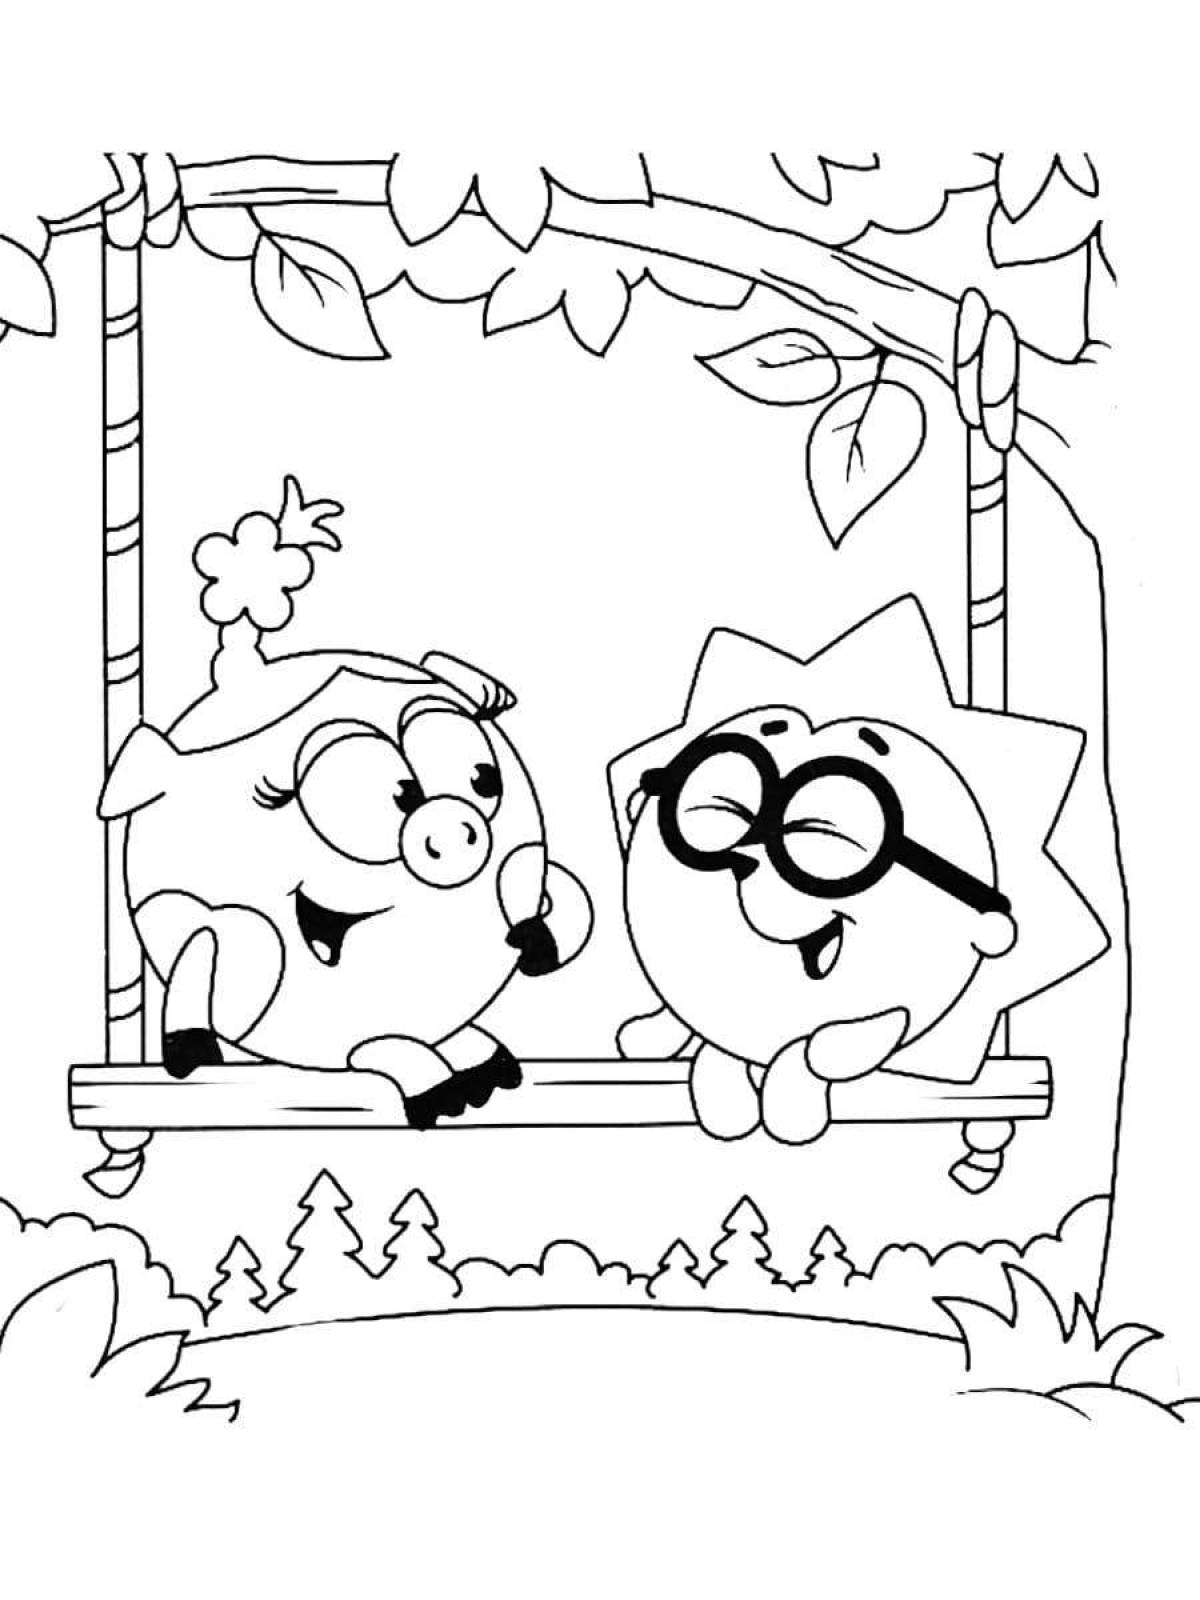 Coloring book adorable smeshariki from sand